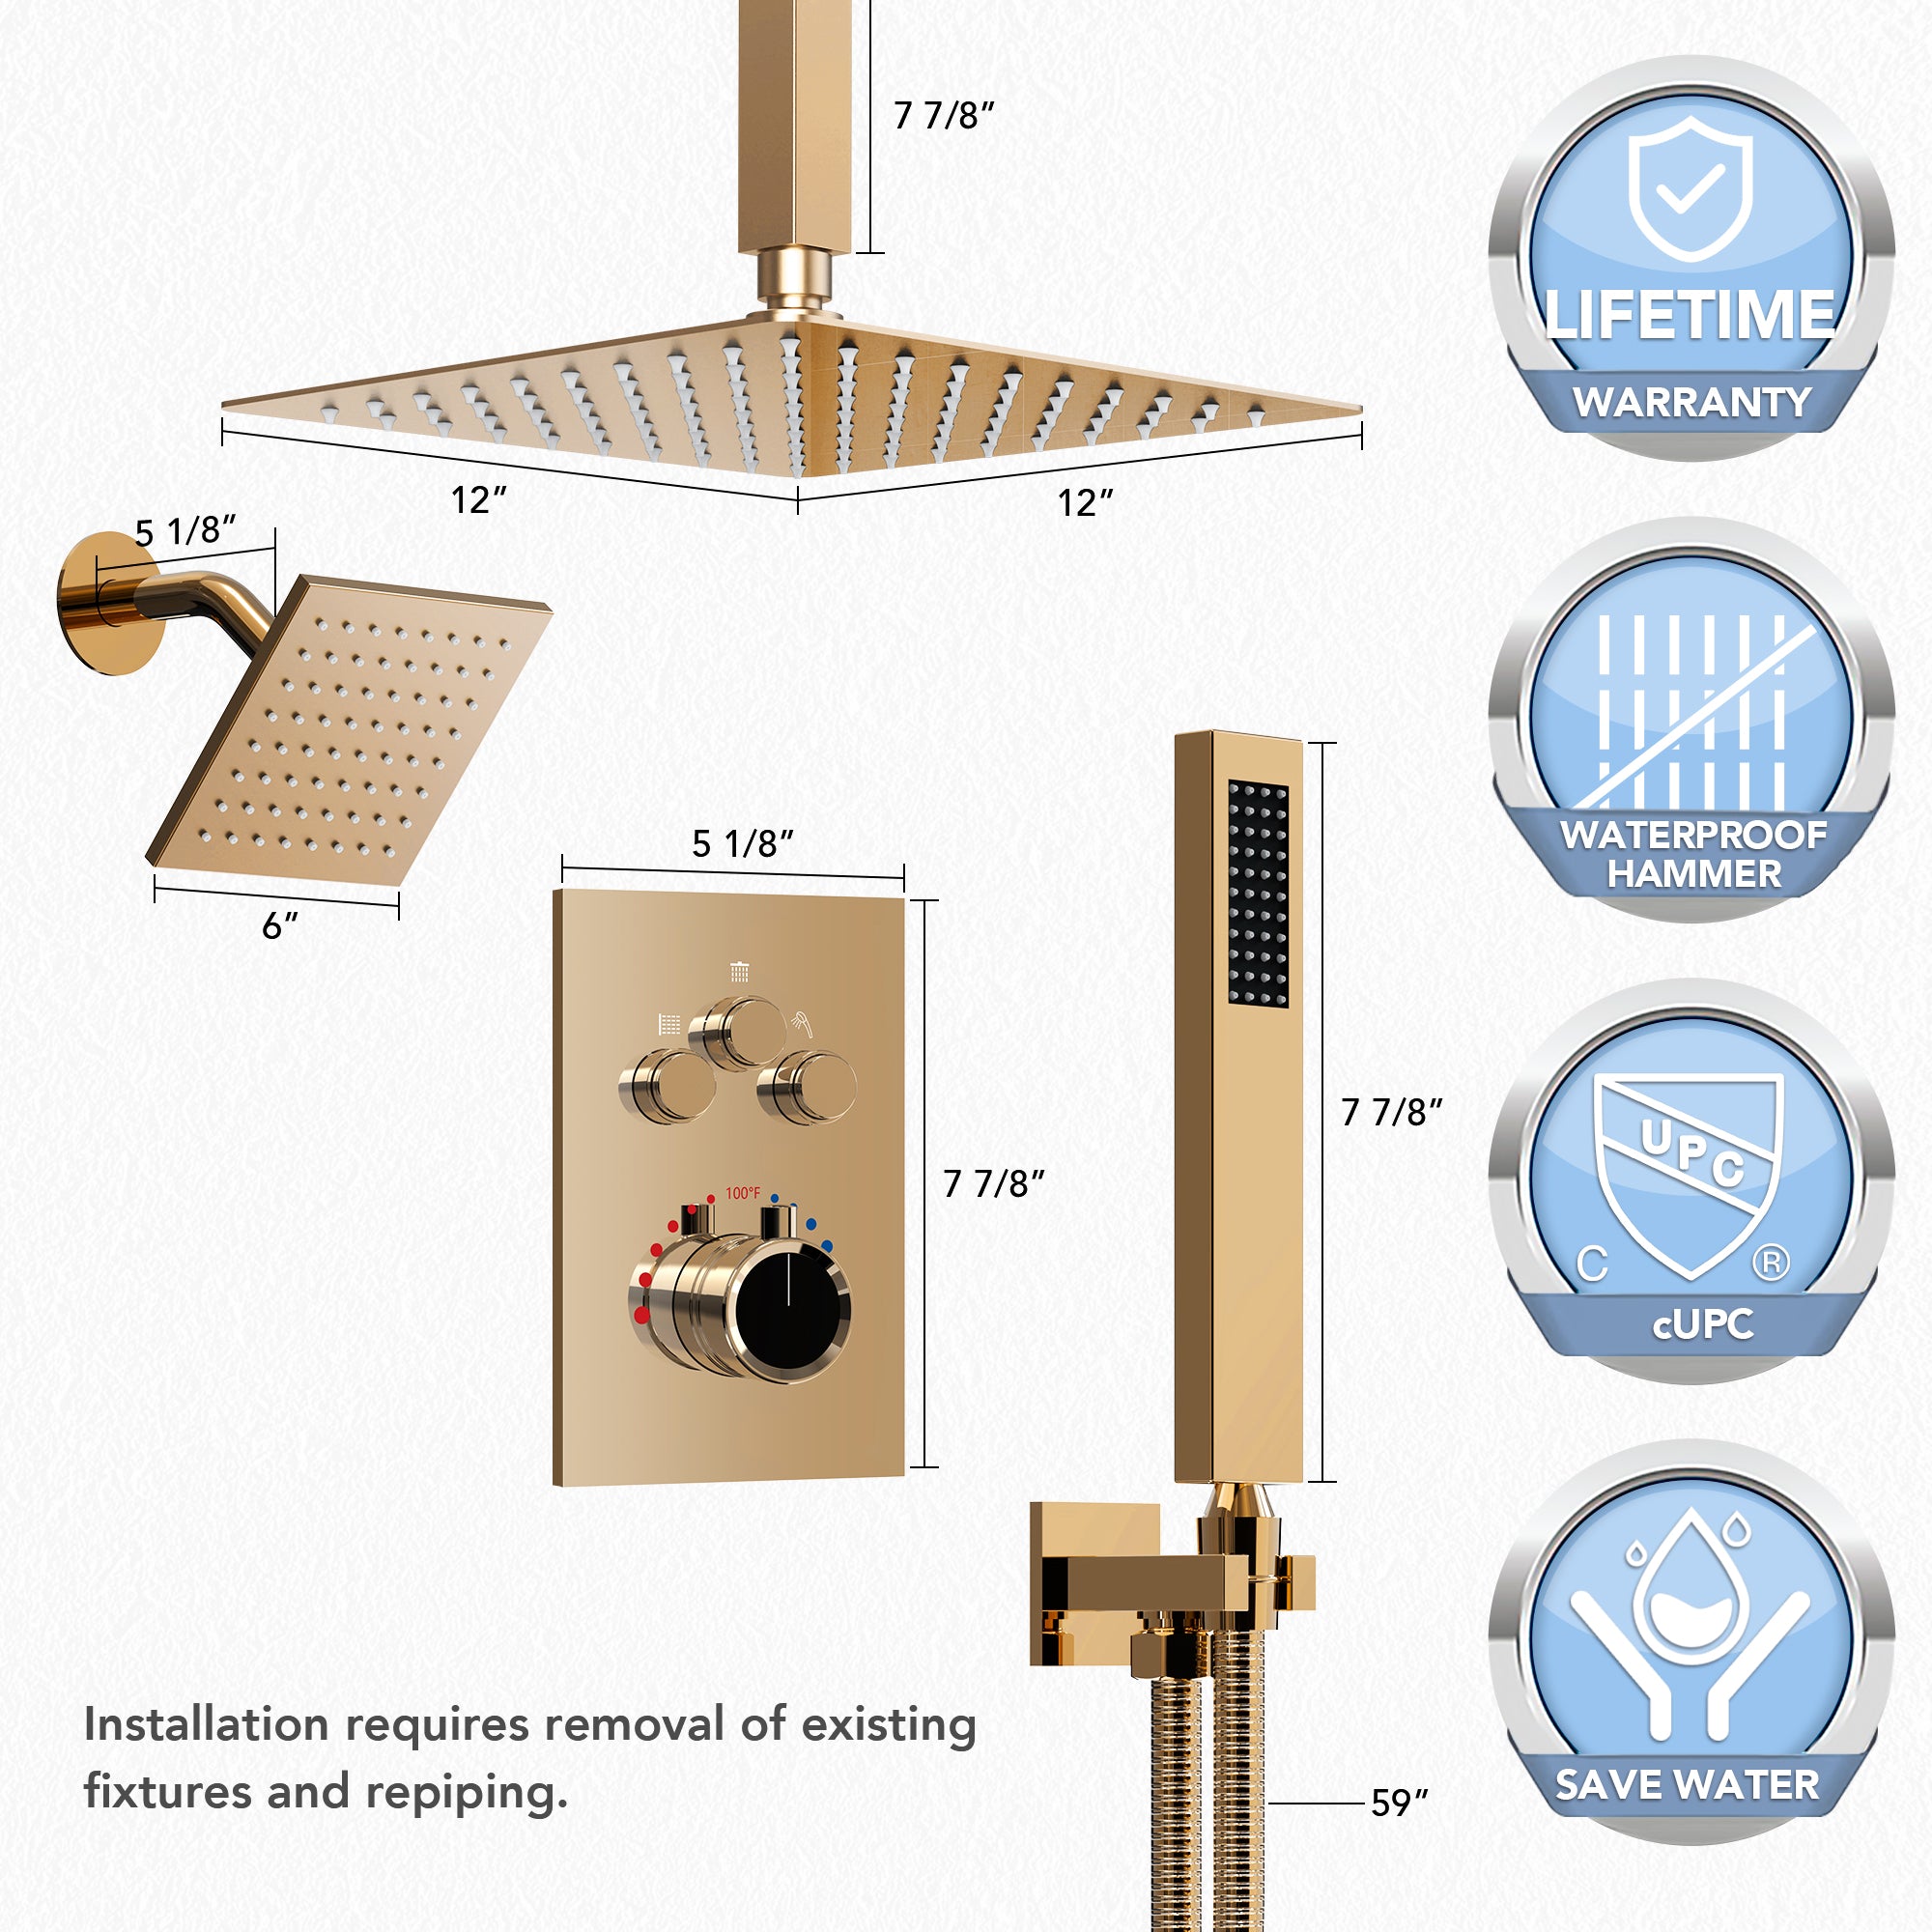 Dimensions guide for bathroom shower system fixtures set with handheld sprayer from top supplier_jpg